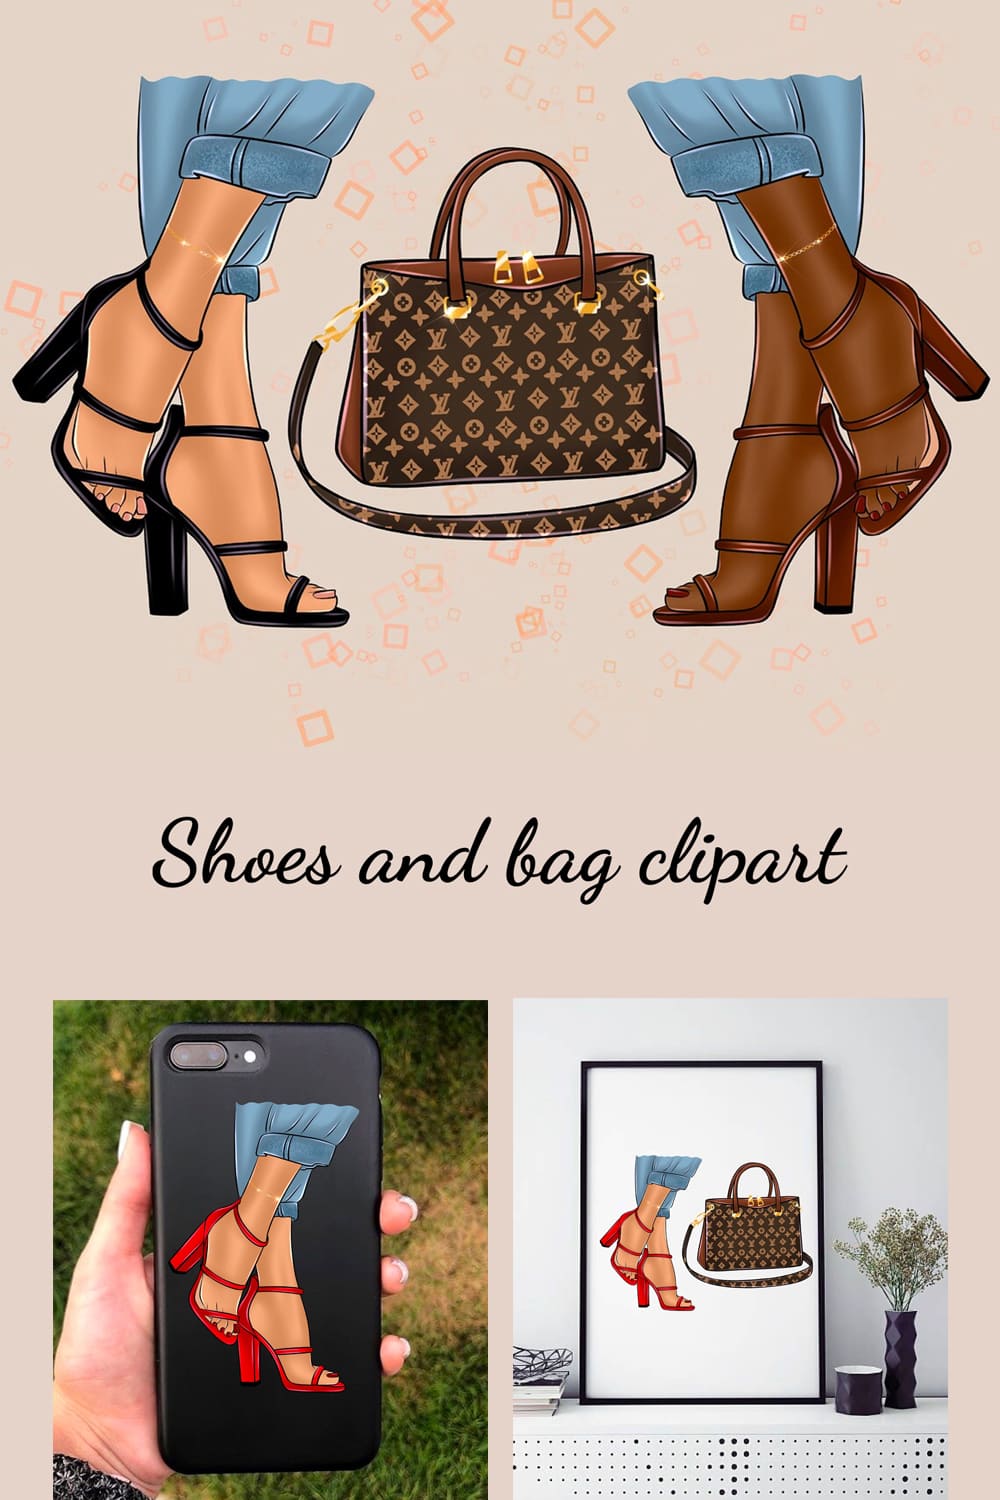 Shoes and Bag Clipart pinterest image.